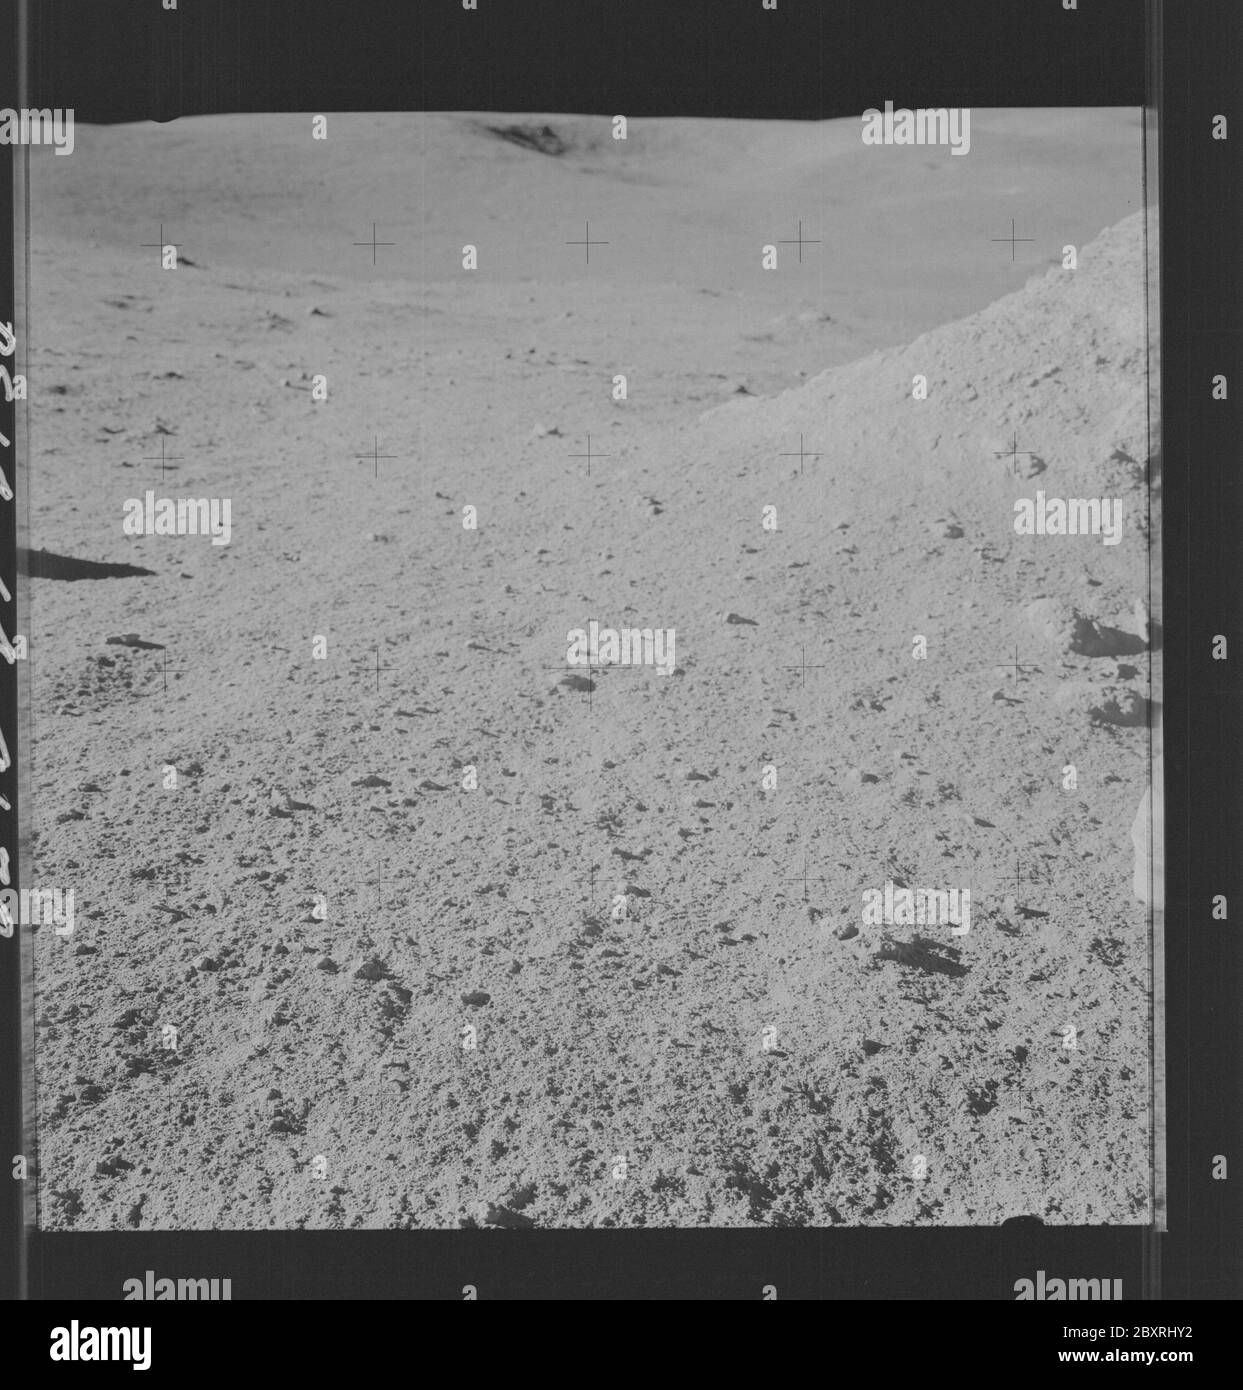 AS14-64-9130 - Apollo 14 - Apollo 14 Mission image - Pan of a large rock during EVA 2 with Old Nameless in the background.; Scope and content:  The original database describes this as: Description: Pan of a large rock during EVA 2 with Old Nameless in the background. Images were taken on the Surface during the Lunar Surface EVA for the Apollo 14 mission. Original film magazine was labeled LL,film type was S0267 (High Speed Black and White Thin Base),60mm lens with a sun elevation of 24 degrees and a Southern azimuth. Subject Terms: Apollo 14 Flight, Moon (Planet) Categories: EVA Original: Film Stock Photo